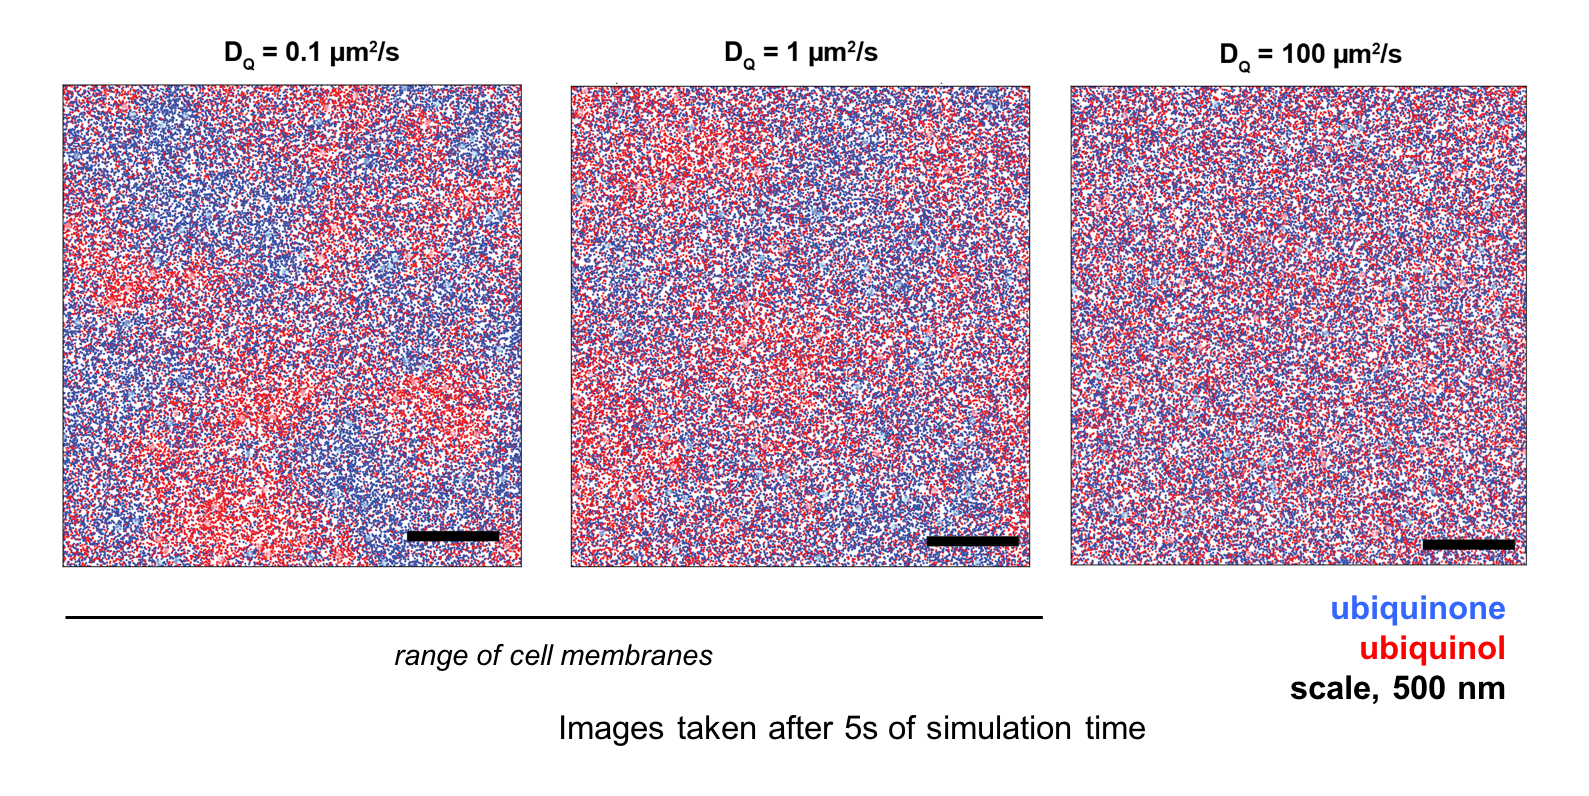 Simulations of ubiquinone distribution on the surface of a bacterial cell. Each square represents the membrane of a cell with different characteristics viscosities, which are experimentally controlled in this study from high (left) to low (right). The dots represent molecules called ubiquinones––small molecules that change that shuttle electrons between enzymes during respiration. Red dots are carrying two electrons, while blue ones are empty. These electrons are finally designated to oxygen, which gets consumed during respiration. Under the viscous membrane conditions (left), the electron carriers form patches of red and blue dots because diffusion is not fast enough to keep up with the speed of respiration enzymes in these locations. This ‘patchiness’ is a hallmark of diffusion in the reaction.